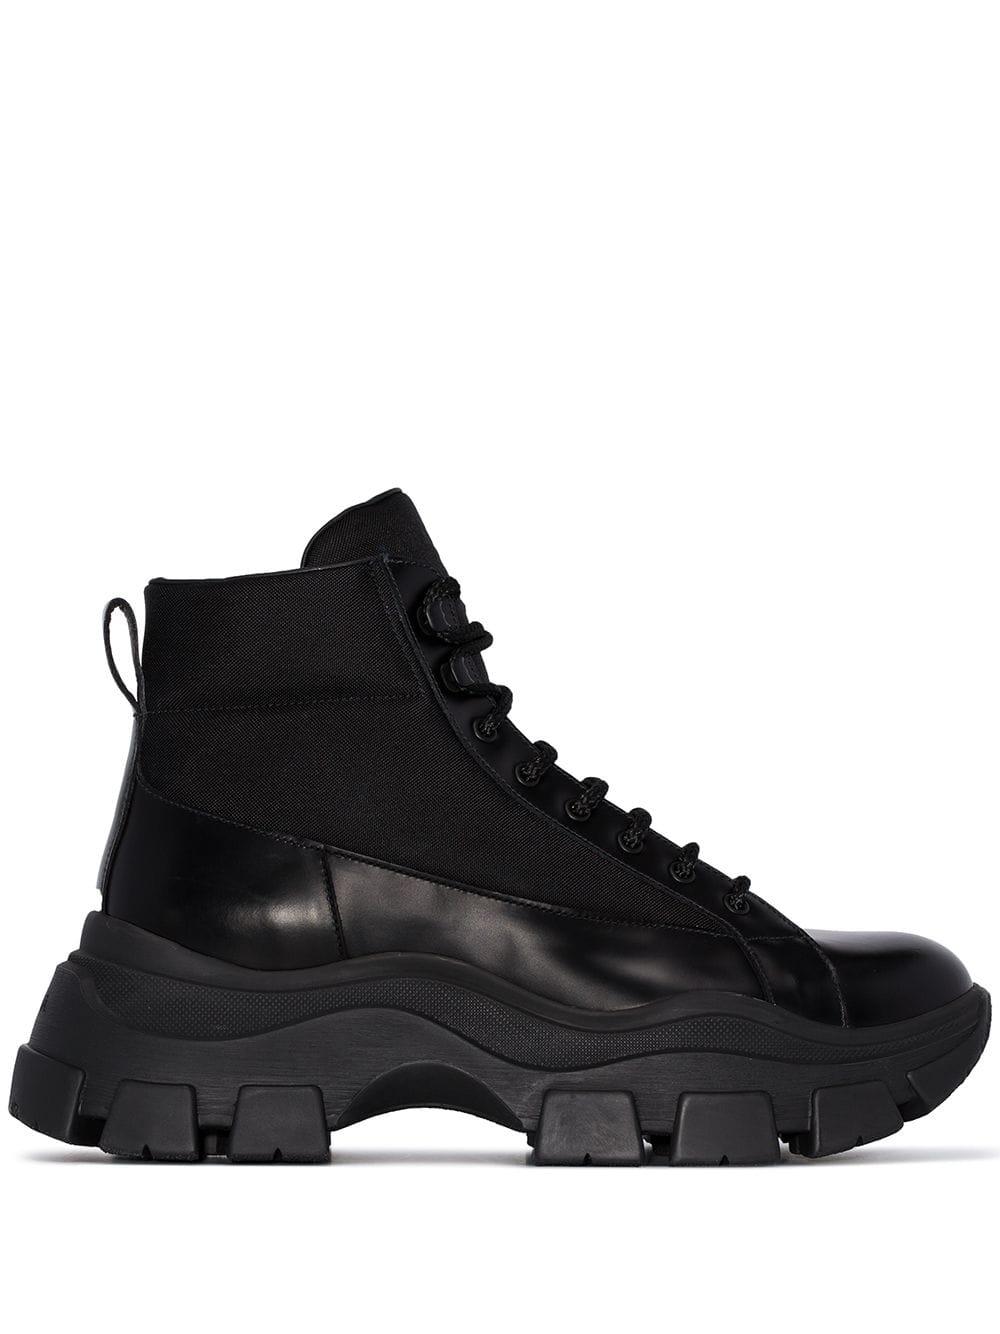 Prada Synthetic Chunky Hiking Boots in Black for Men - Lyst